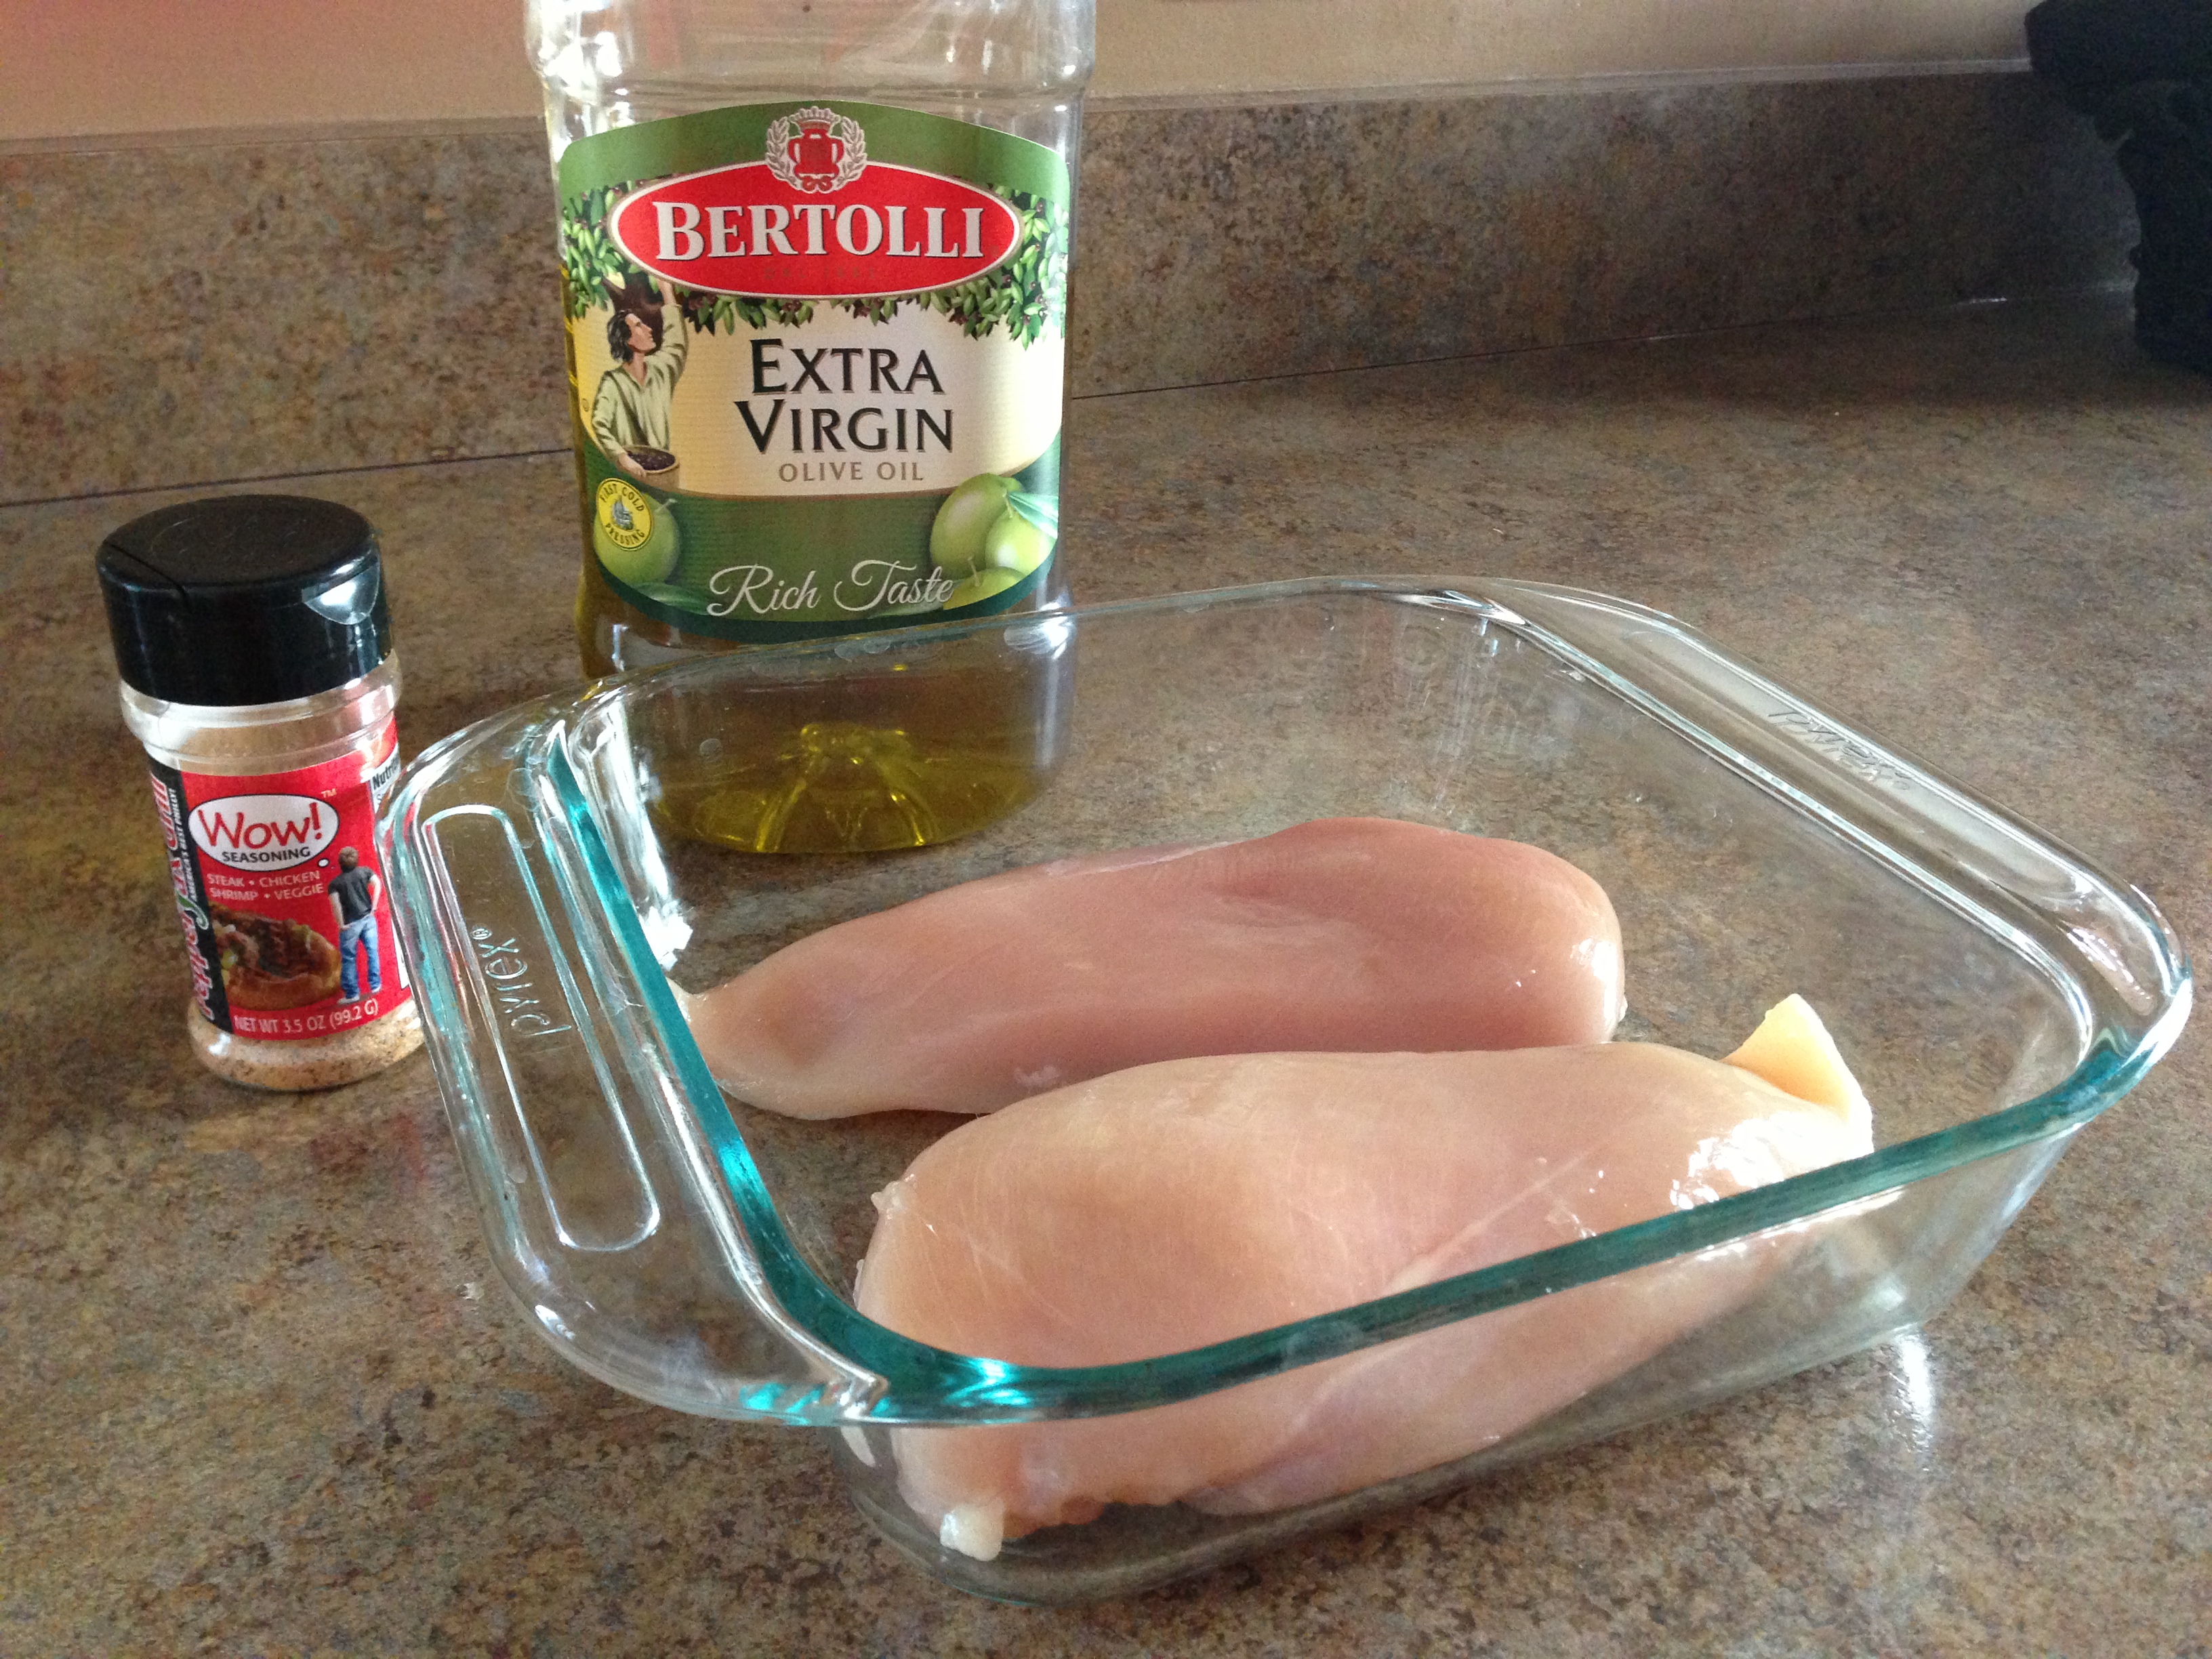 What is a recipe for baked boneless, skinless chicken breast?